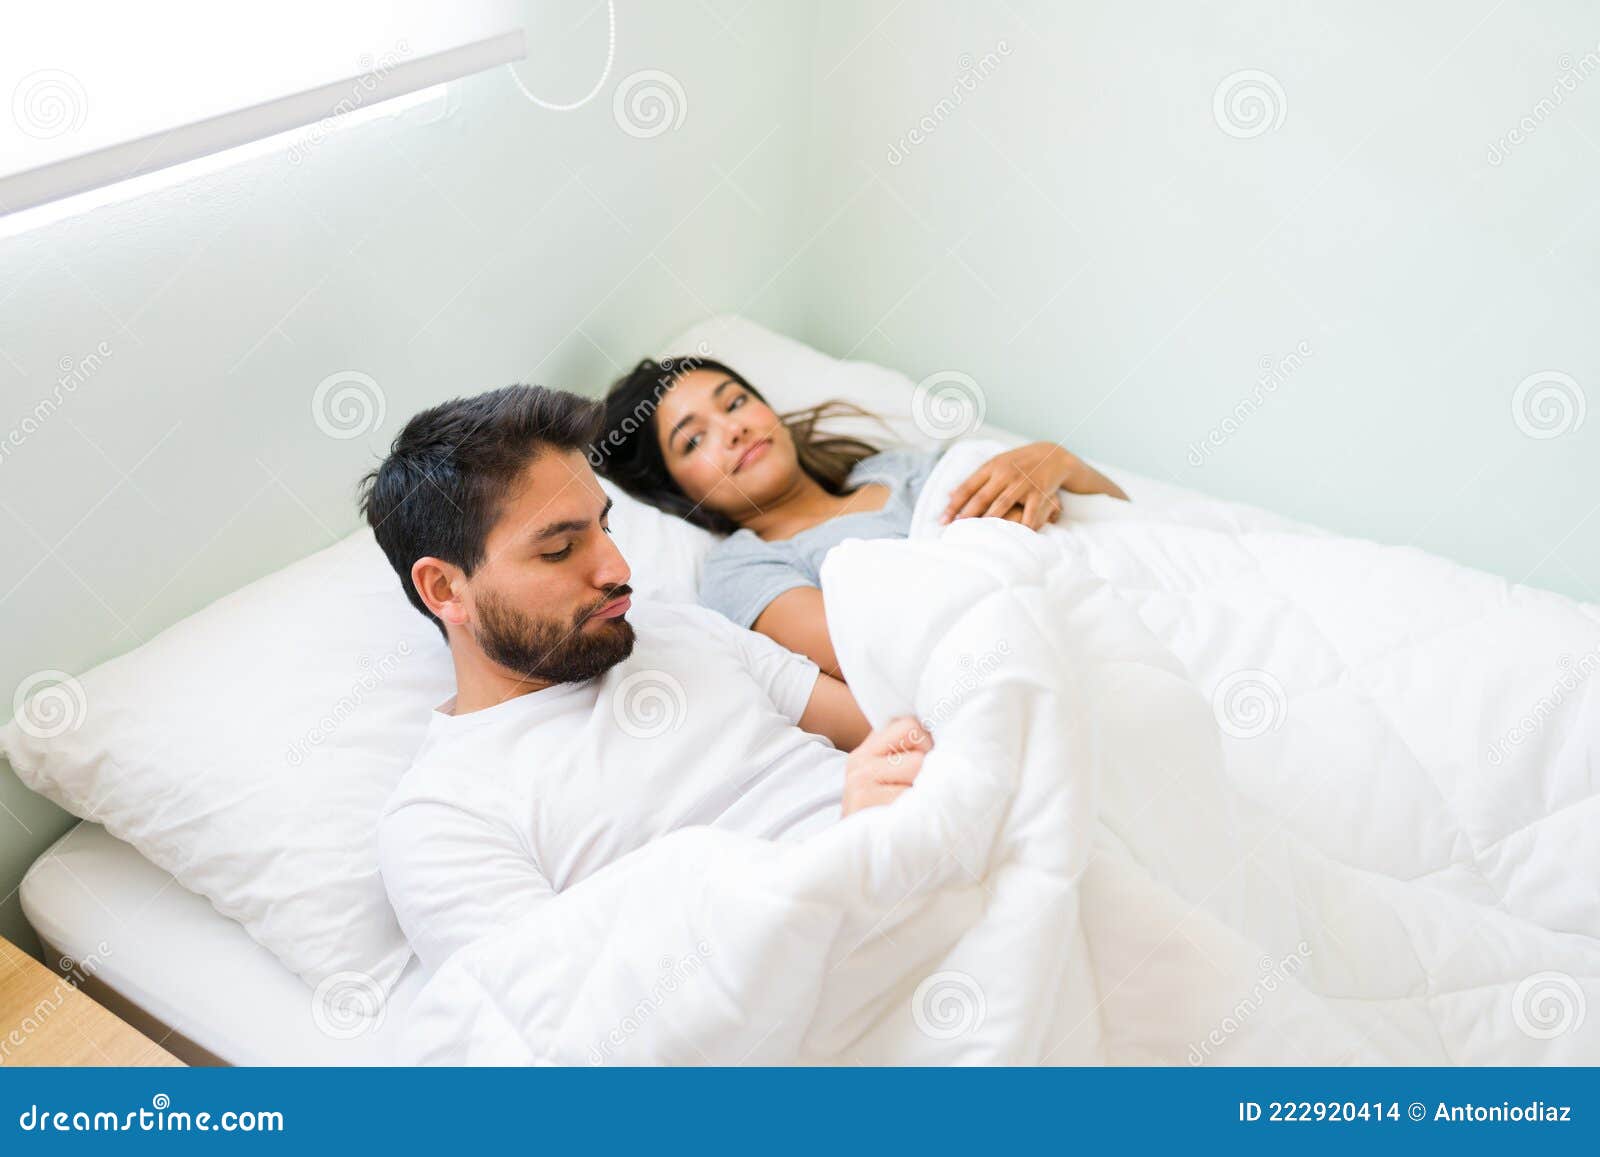 Sad Husband with Problems in the Bedroom Stock Photo pic